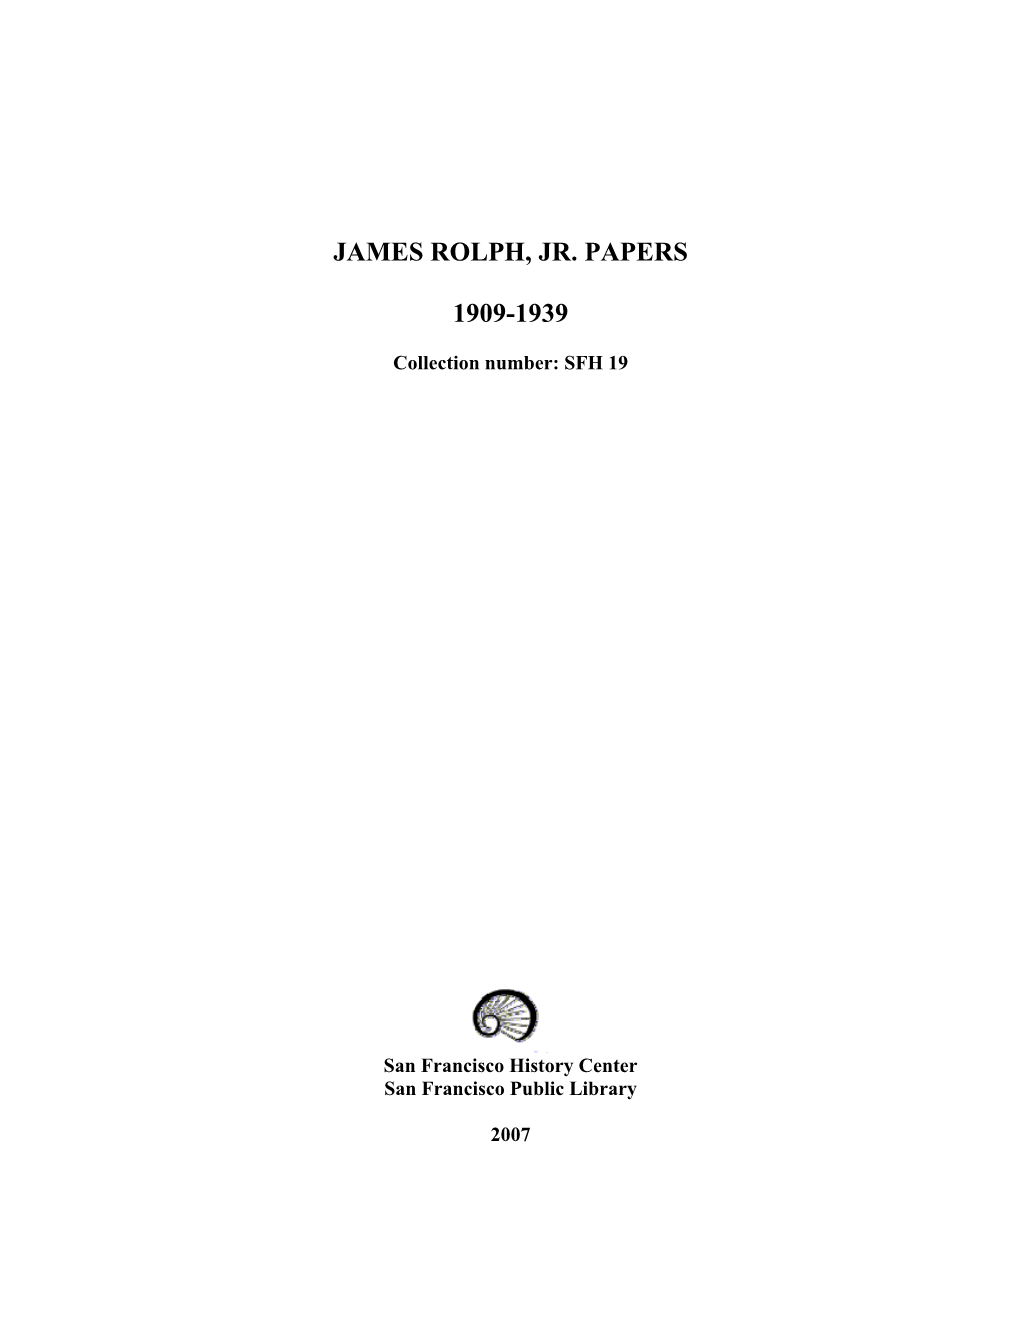 James Rolph Papers (SFH 19), San Francisco History Center, San Francisco Public Library